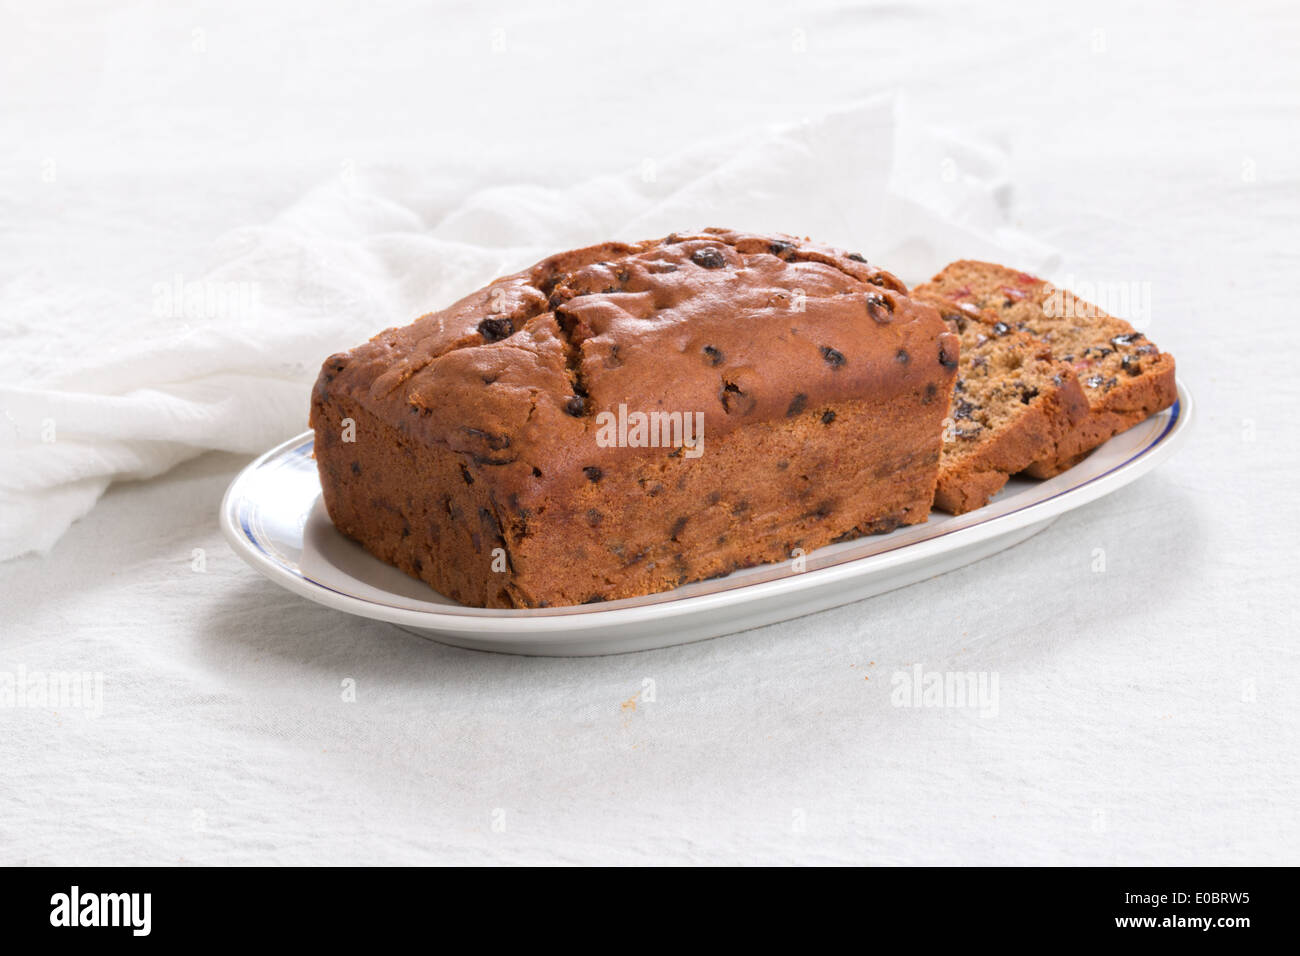 Fruit loaf /cake with slices on a white plate with a blue rim on white  (10 of 19) Stock Photo